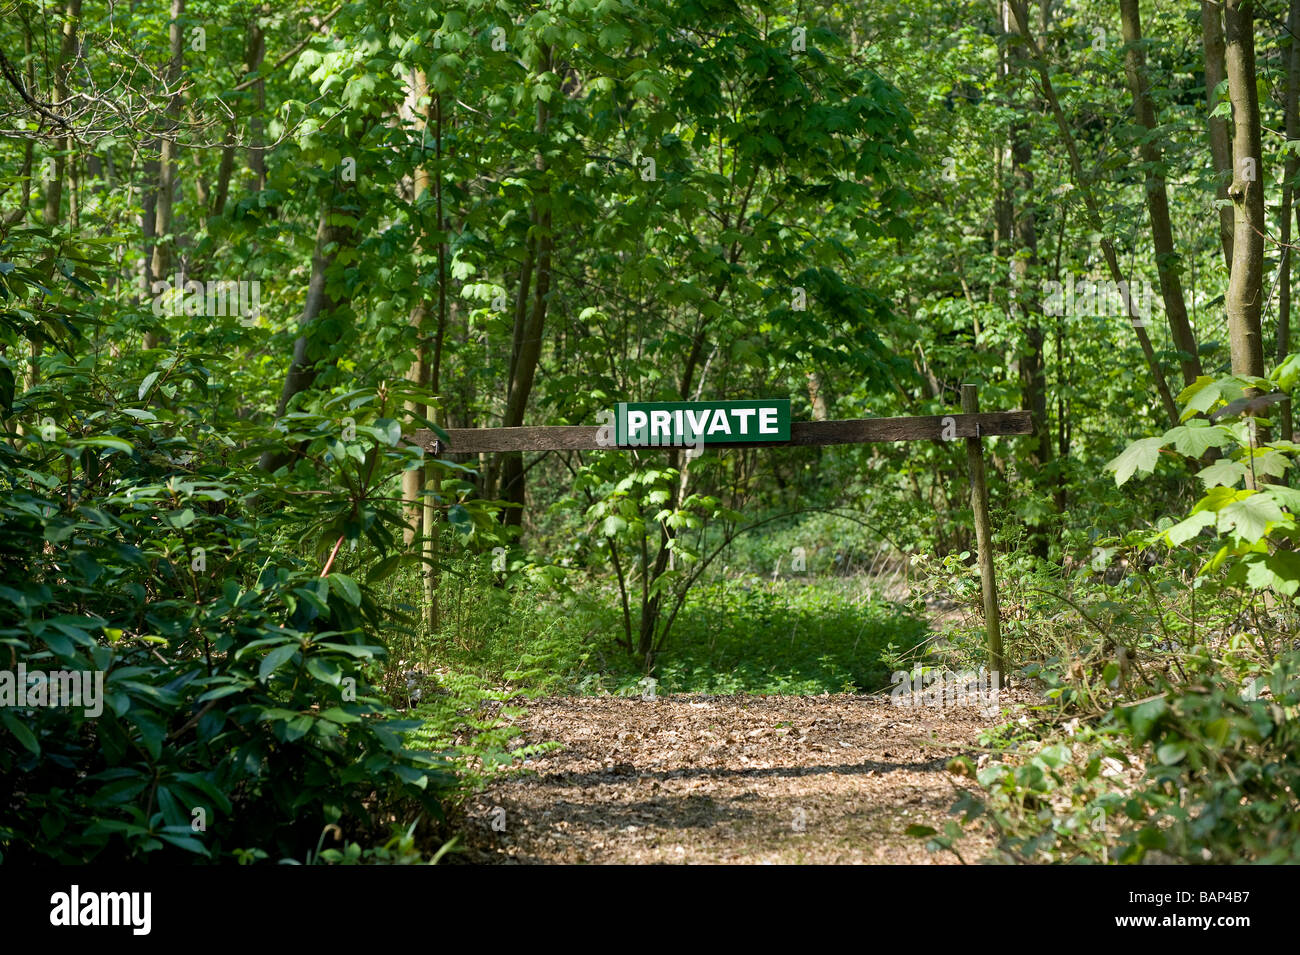 private sign on woodland track, norfolk, england Stock Photo